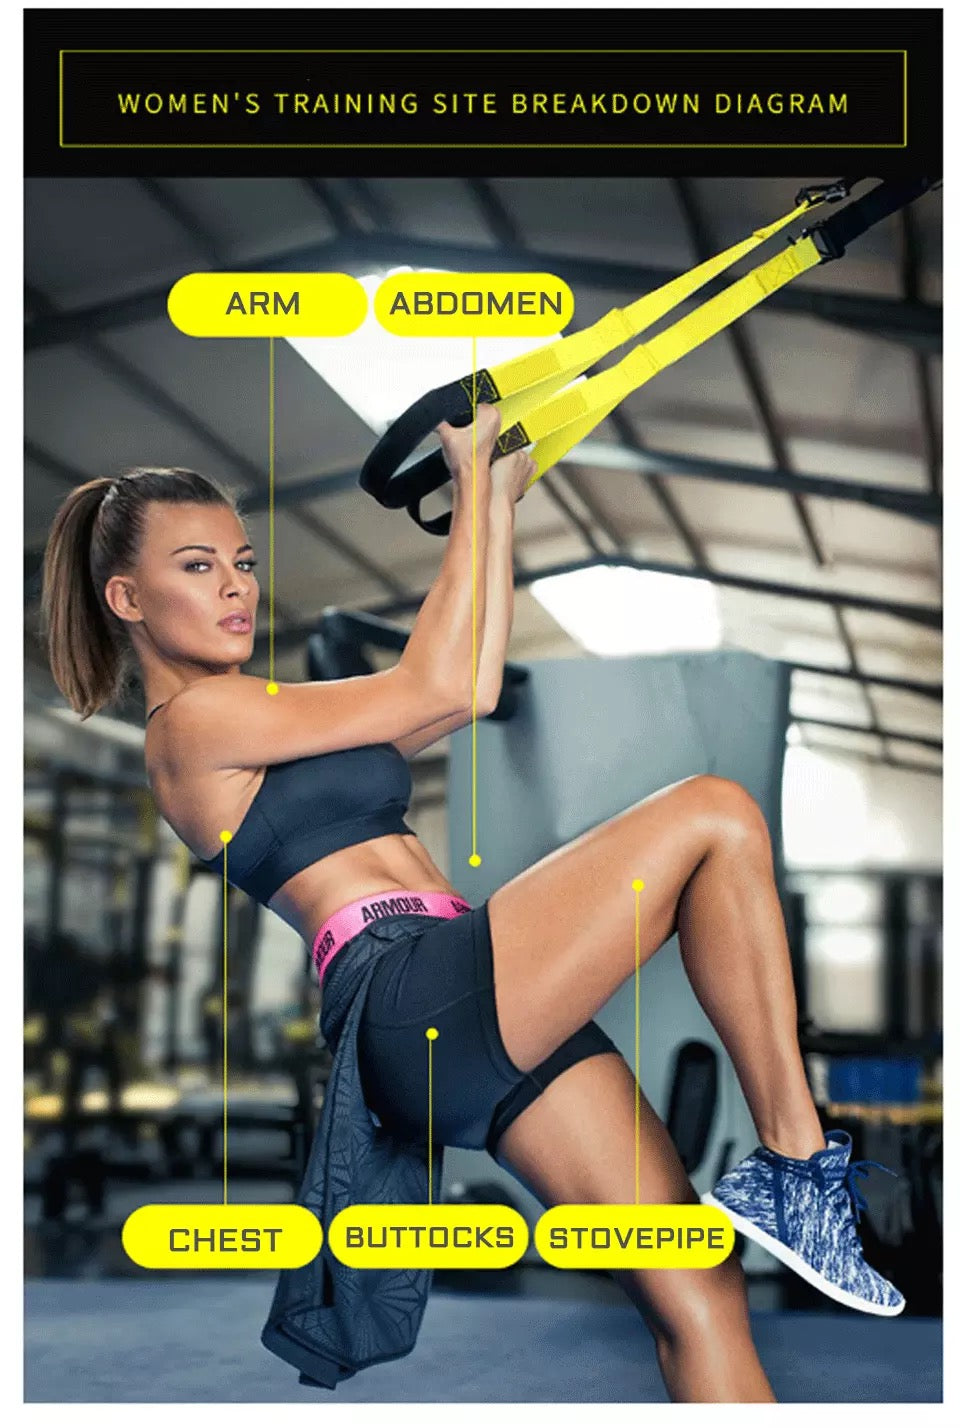 TRX ALL-IN-ONE Suspension Training | Bodyweight Resistance System | Full Body Workouts for Home, Travel, and Outdoors | Build Muscle, Burn Fat, Improve Cardio | Free Workouts Included